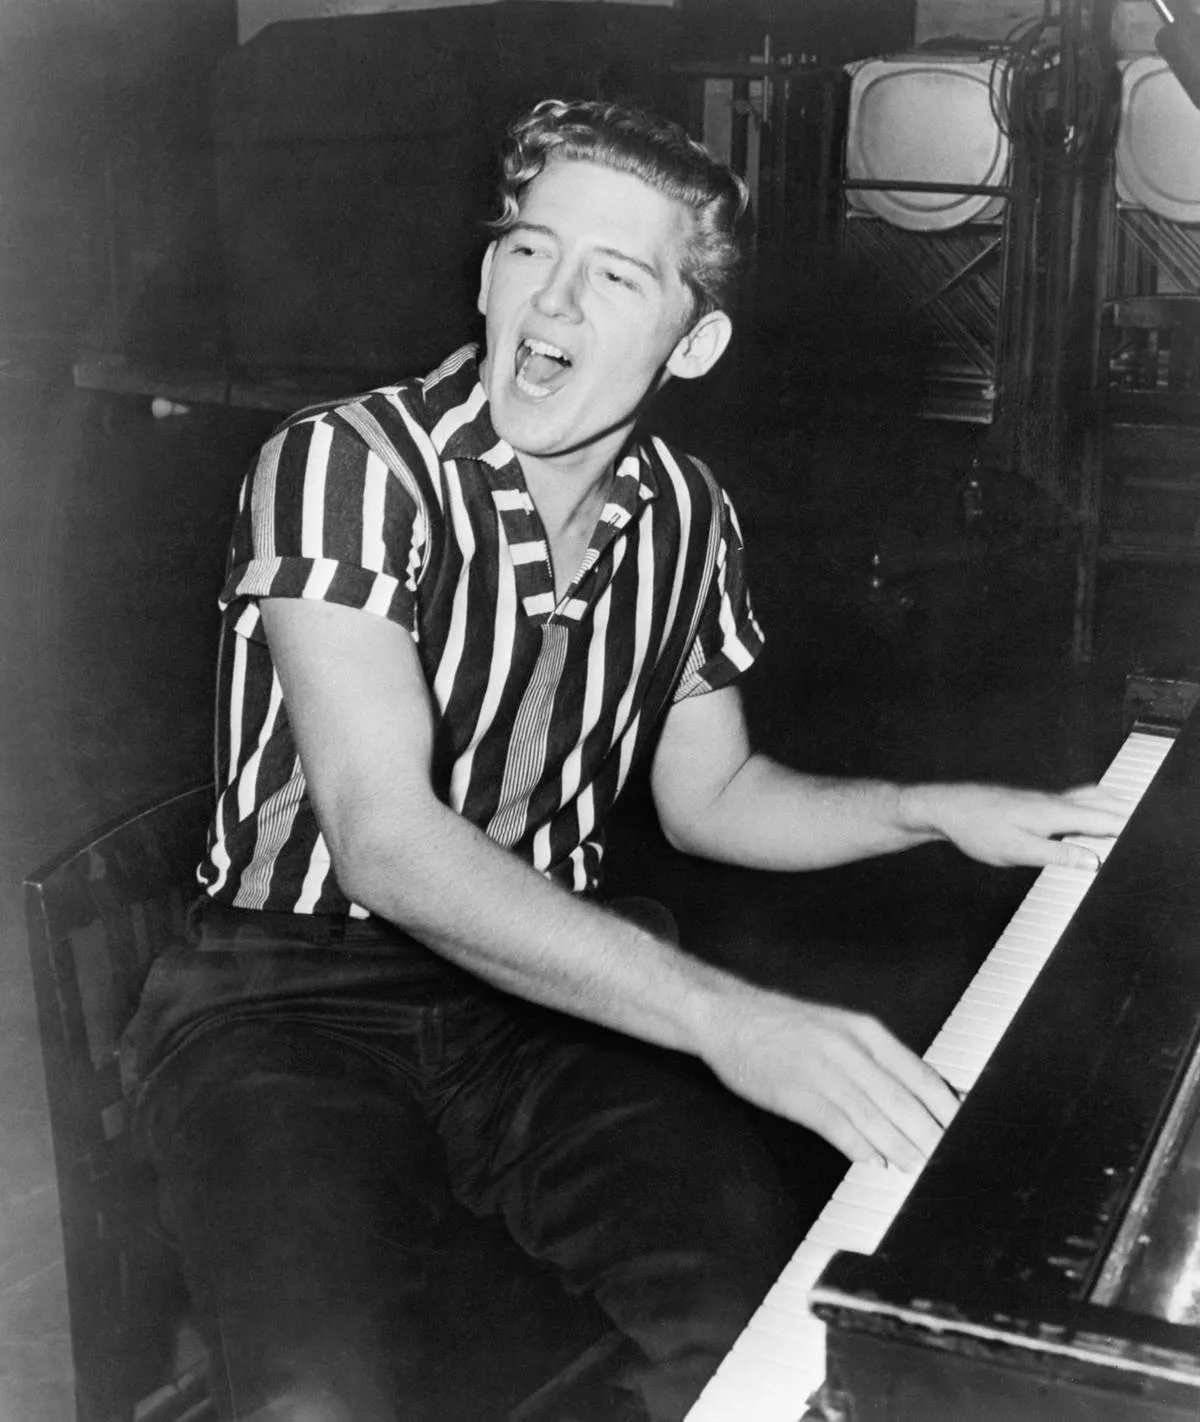 Jerry Lee Lewis at Piano